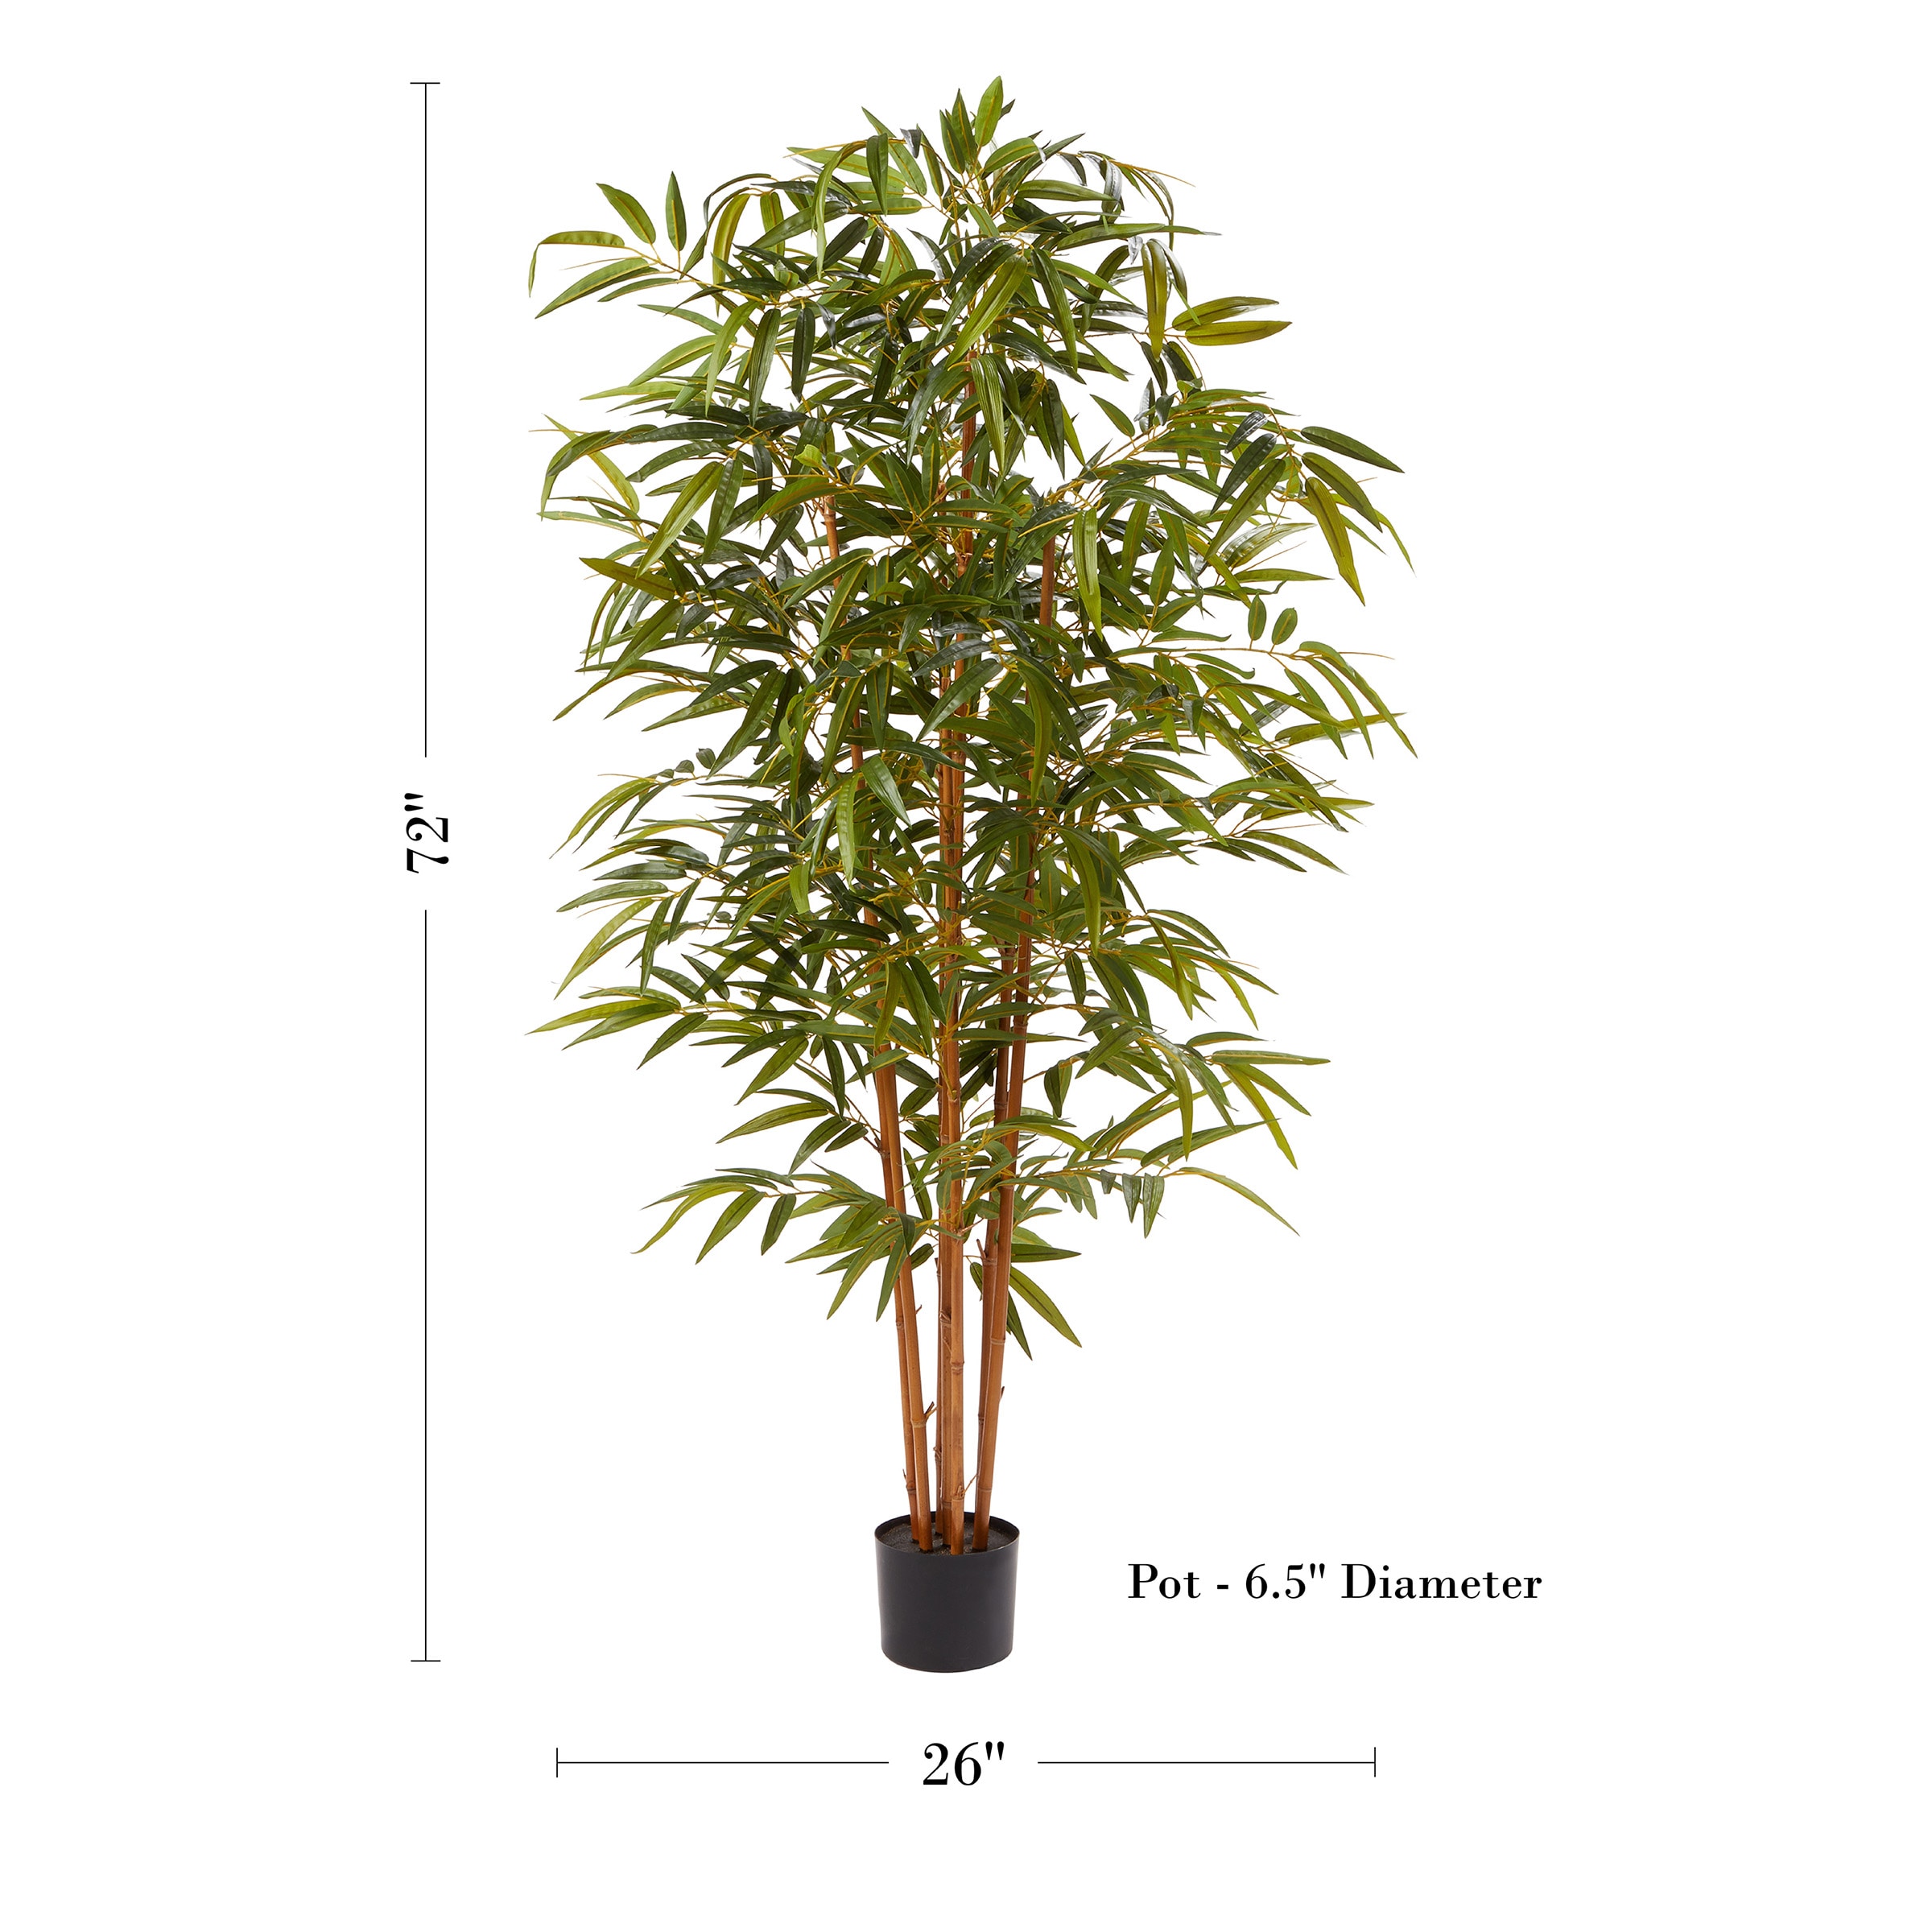 Vickerman Everyday 32 Indoor Artificial Green Eucalyptus Leaf Spray -  Realistic Looking Colorful Foliage of Durable Polyester - Maintenance Free  - 3